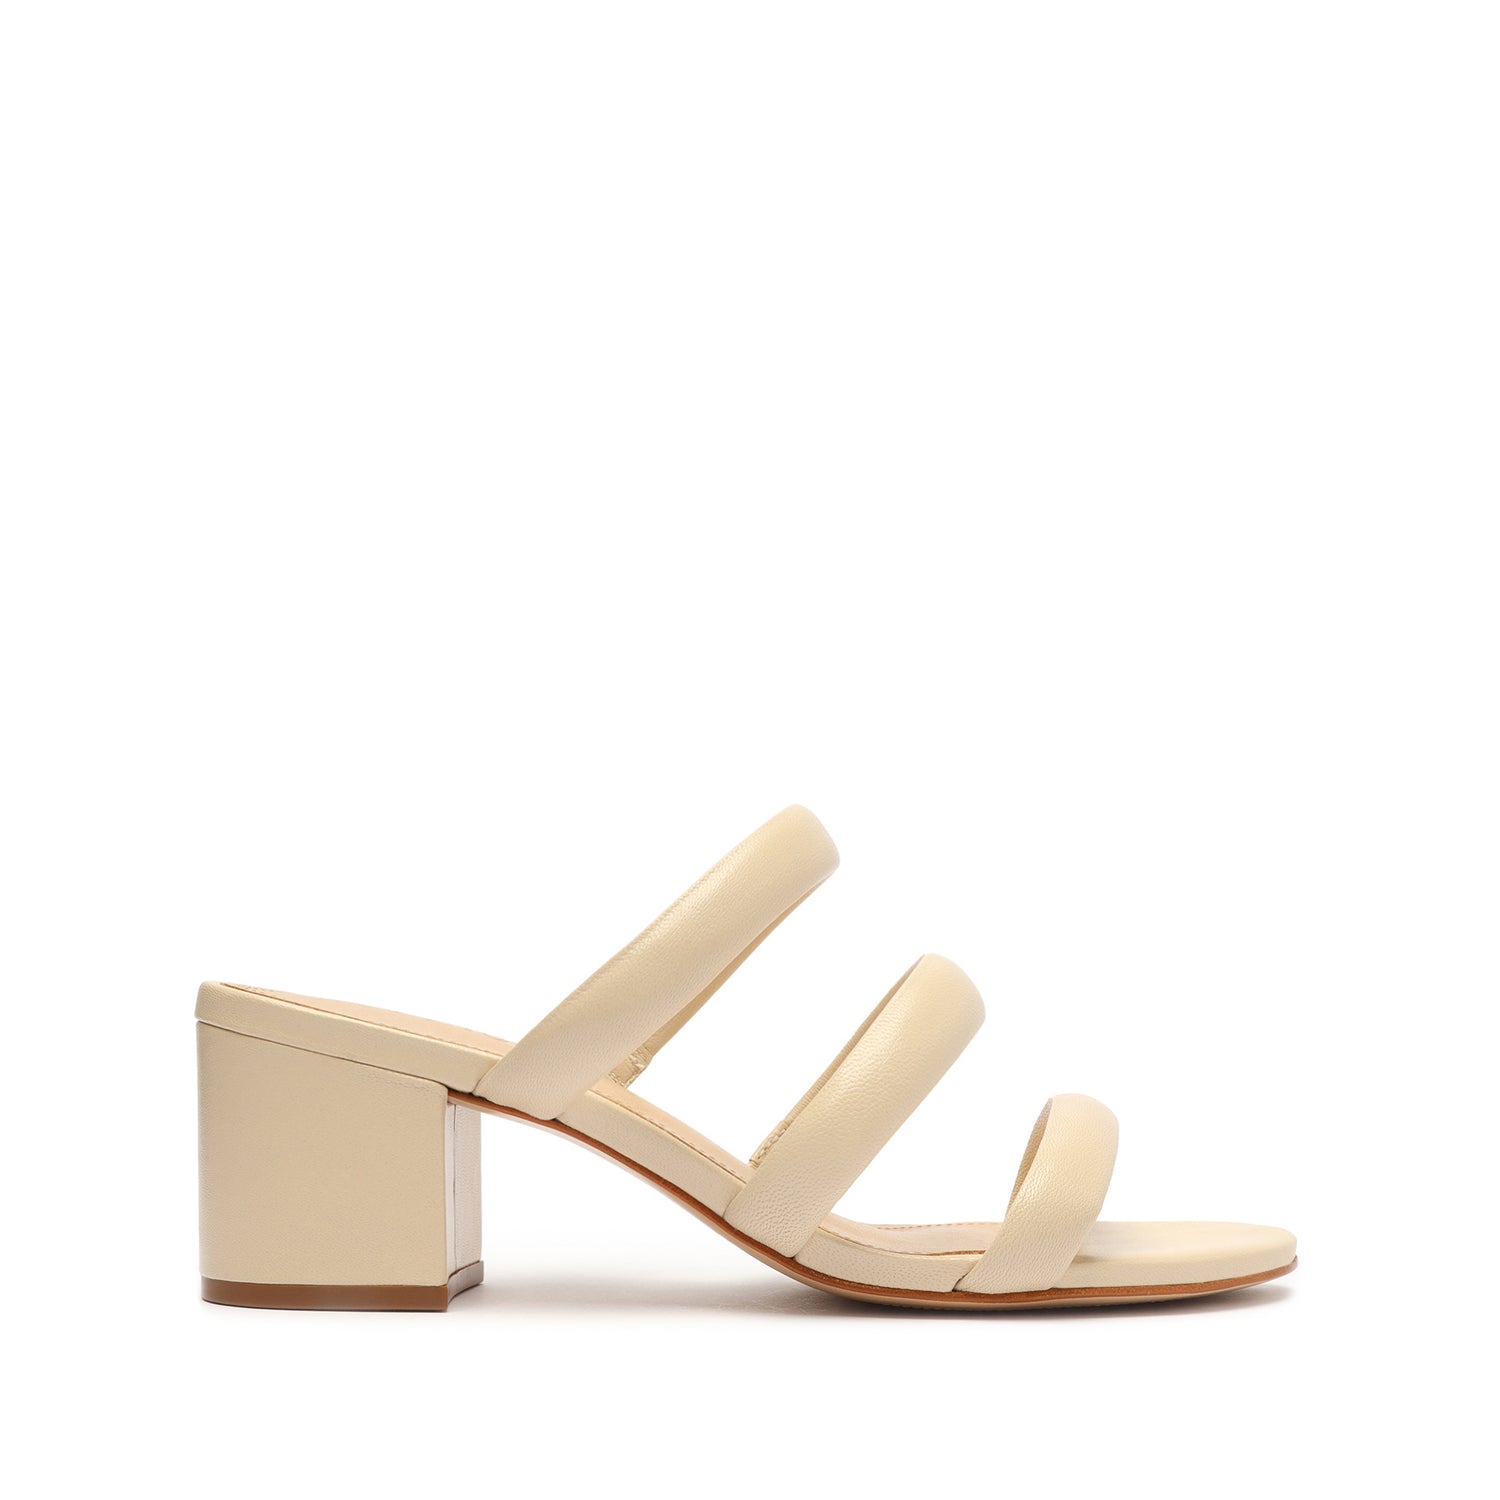 Olly Mid Block Nappa Leather Sandal Sandals OLD 5 Eggshell Nappa Leather - Schutz Shoes